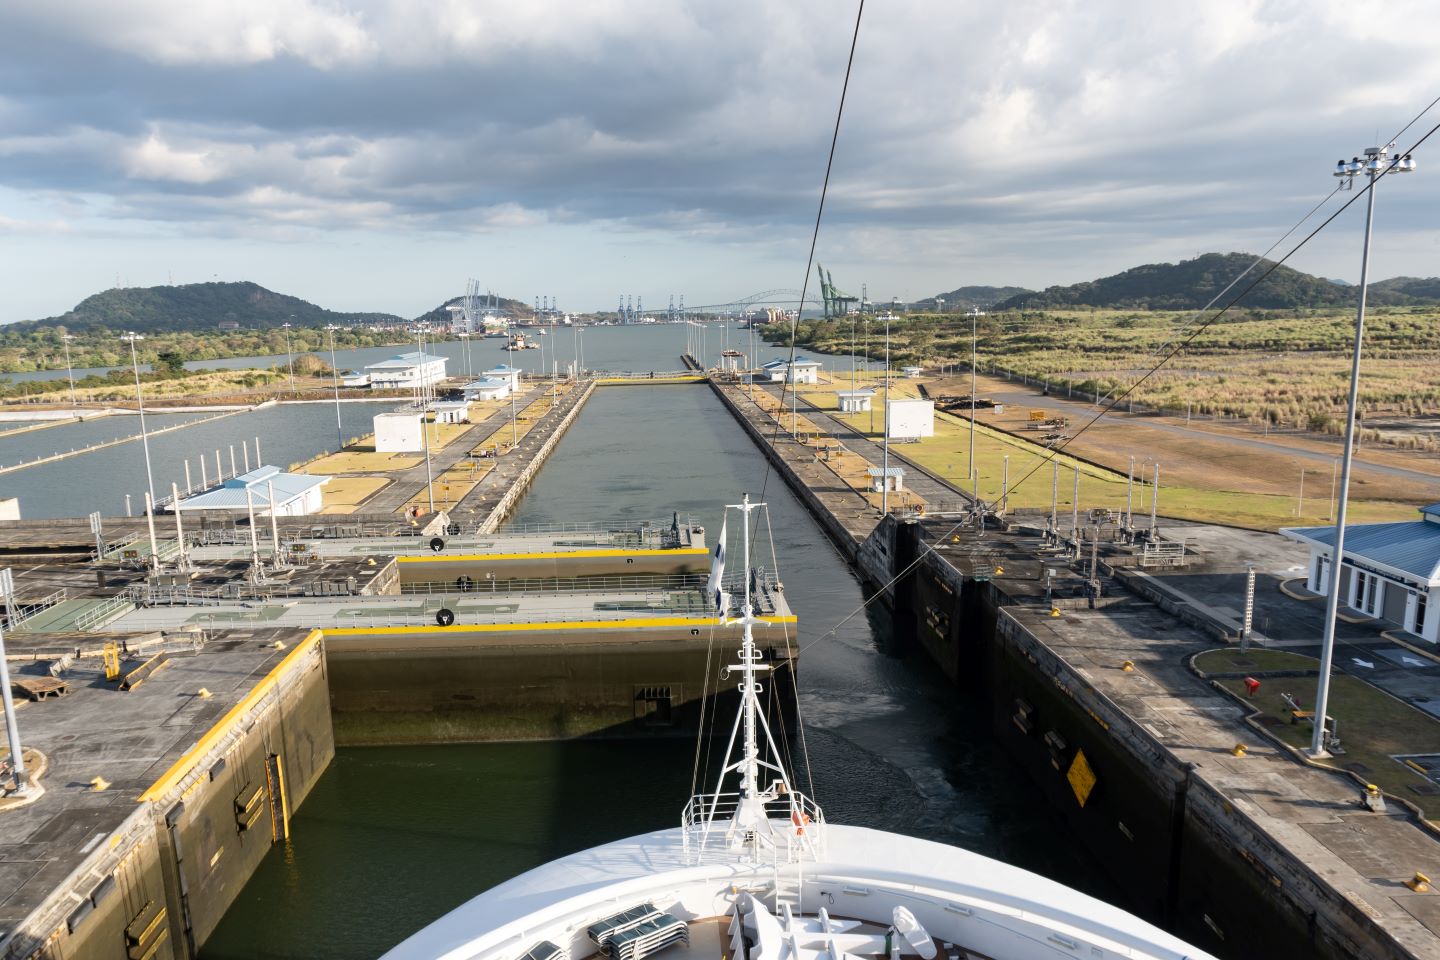 Panama Canal: expected rain could stop restrictions - Ship Technology